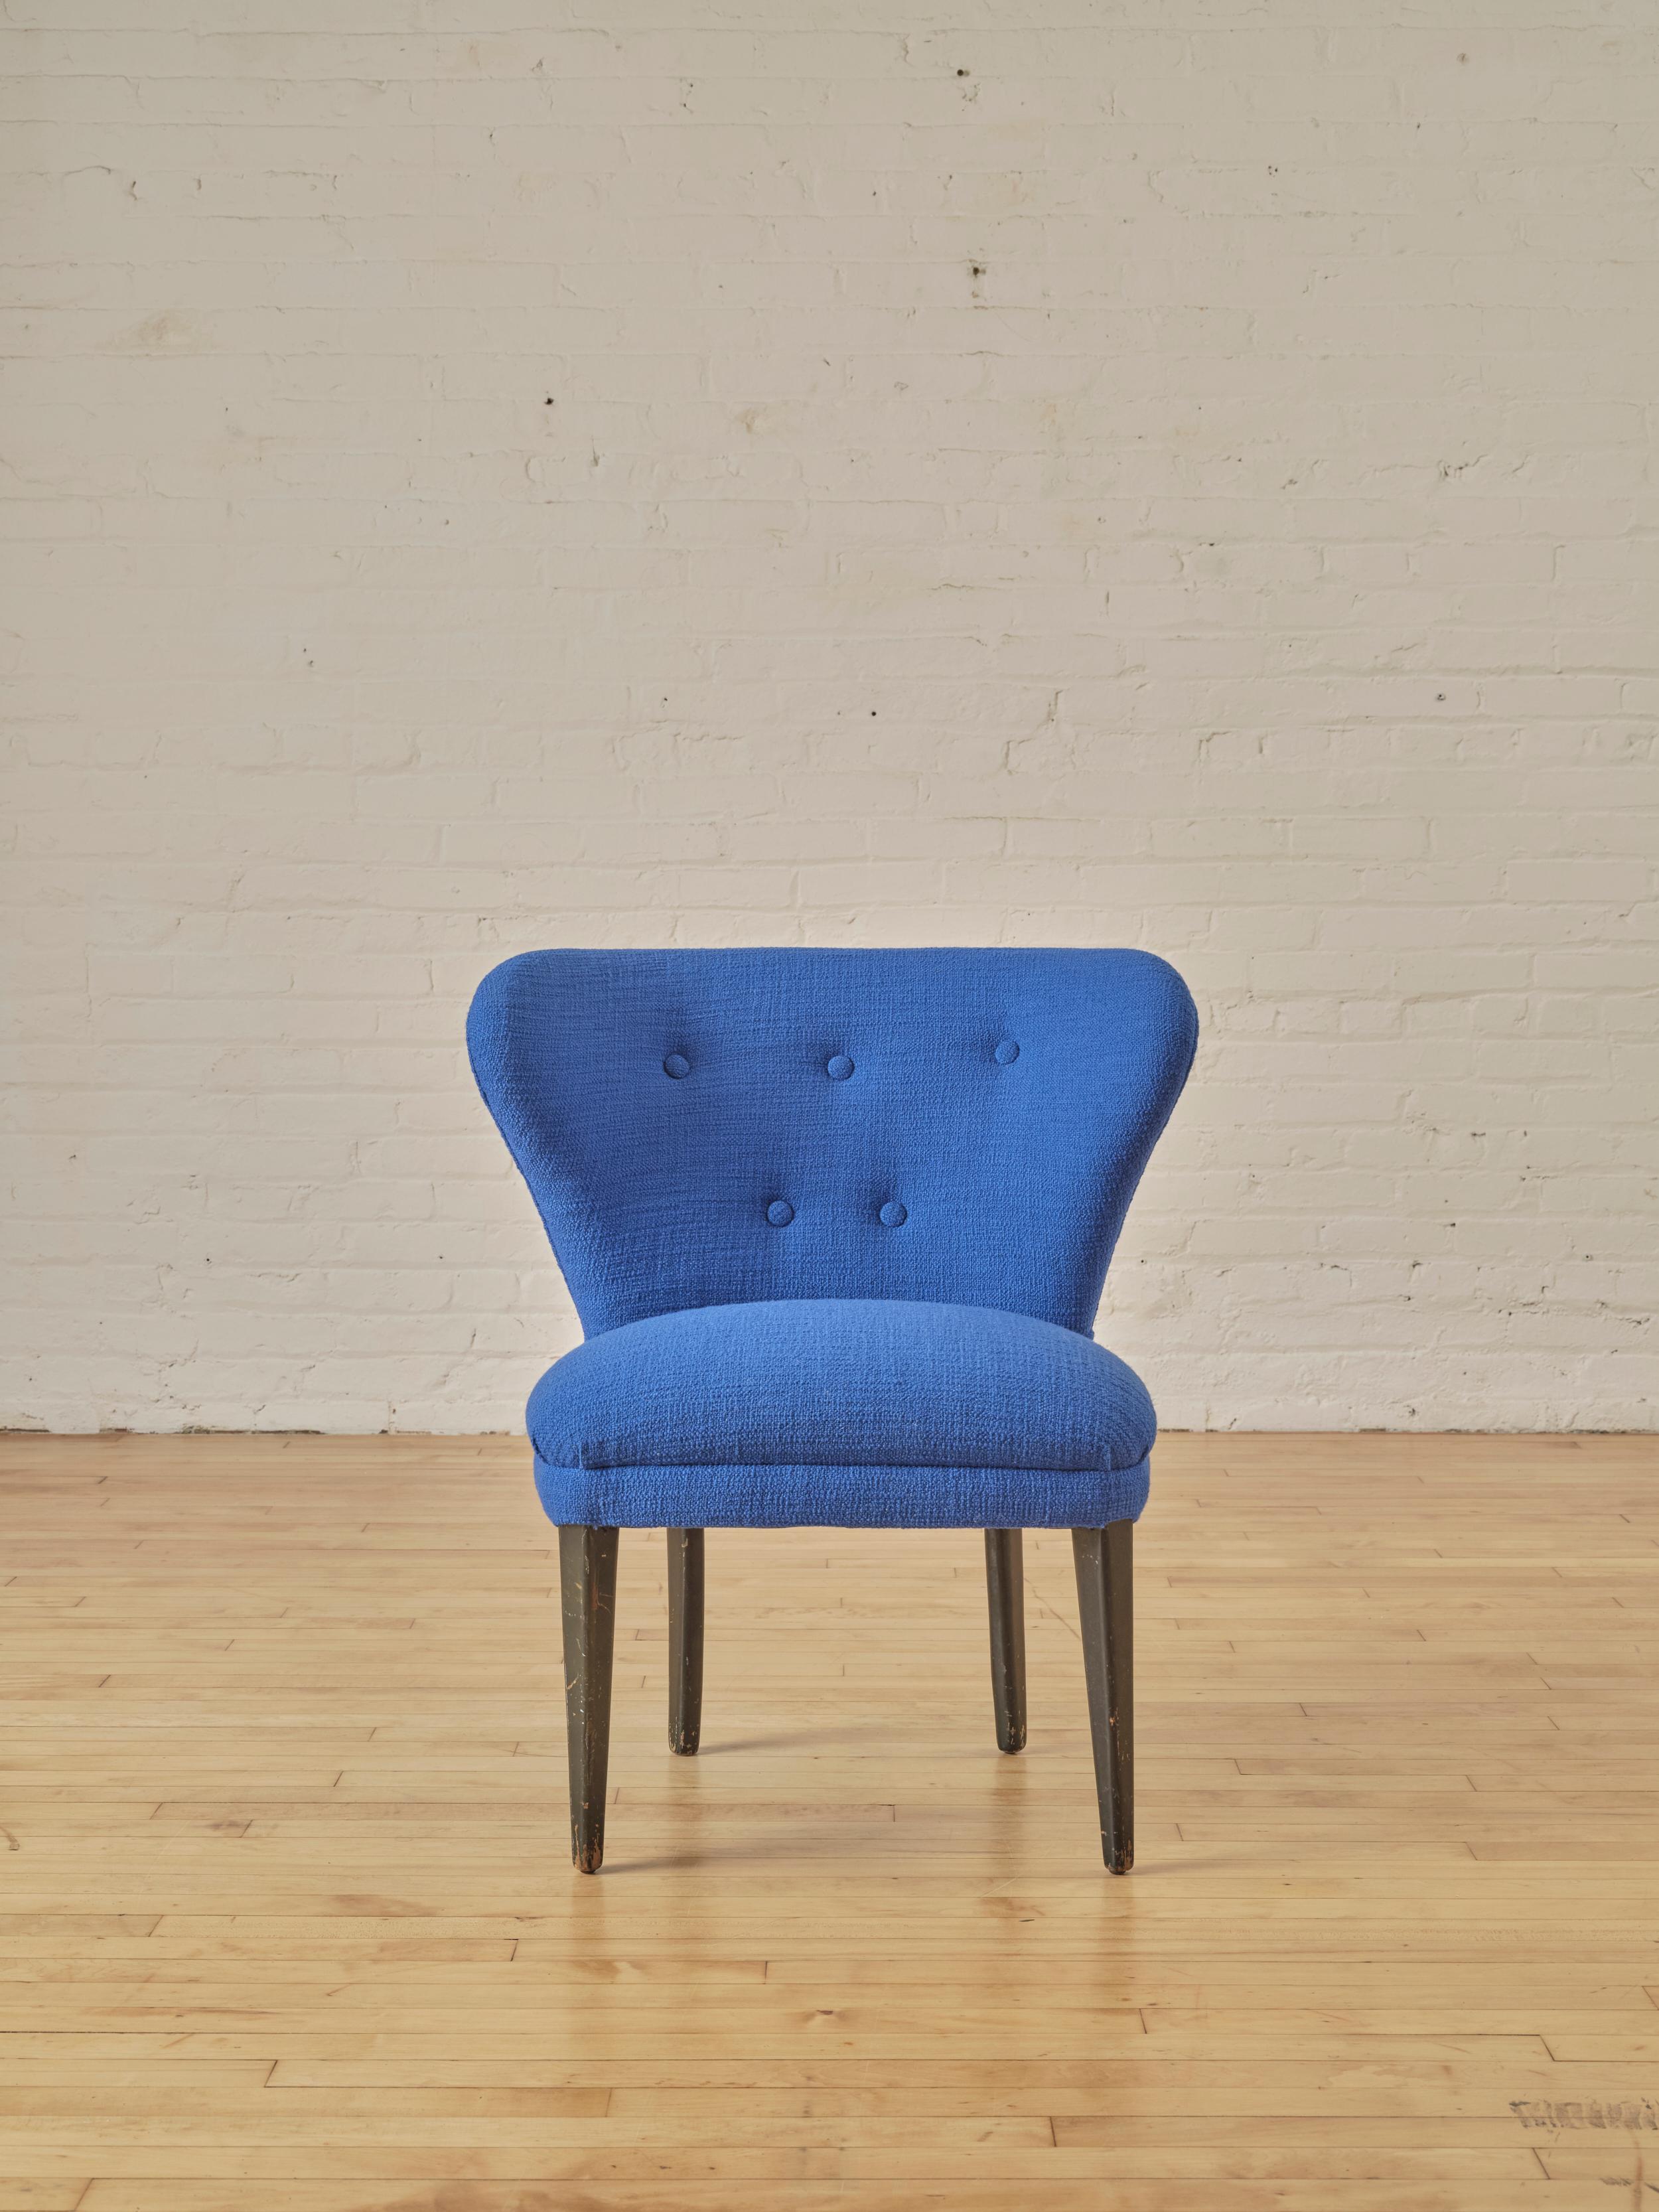 Modernist Lounge Chair with a wide backrest and black wooden legs, recently reupholstered in Dedar Milano's 'A Perfect Flower' fabric in Cobalt Blue.